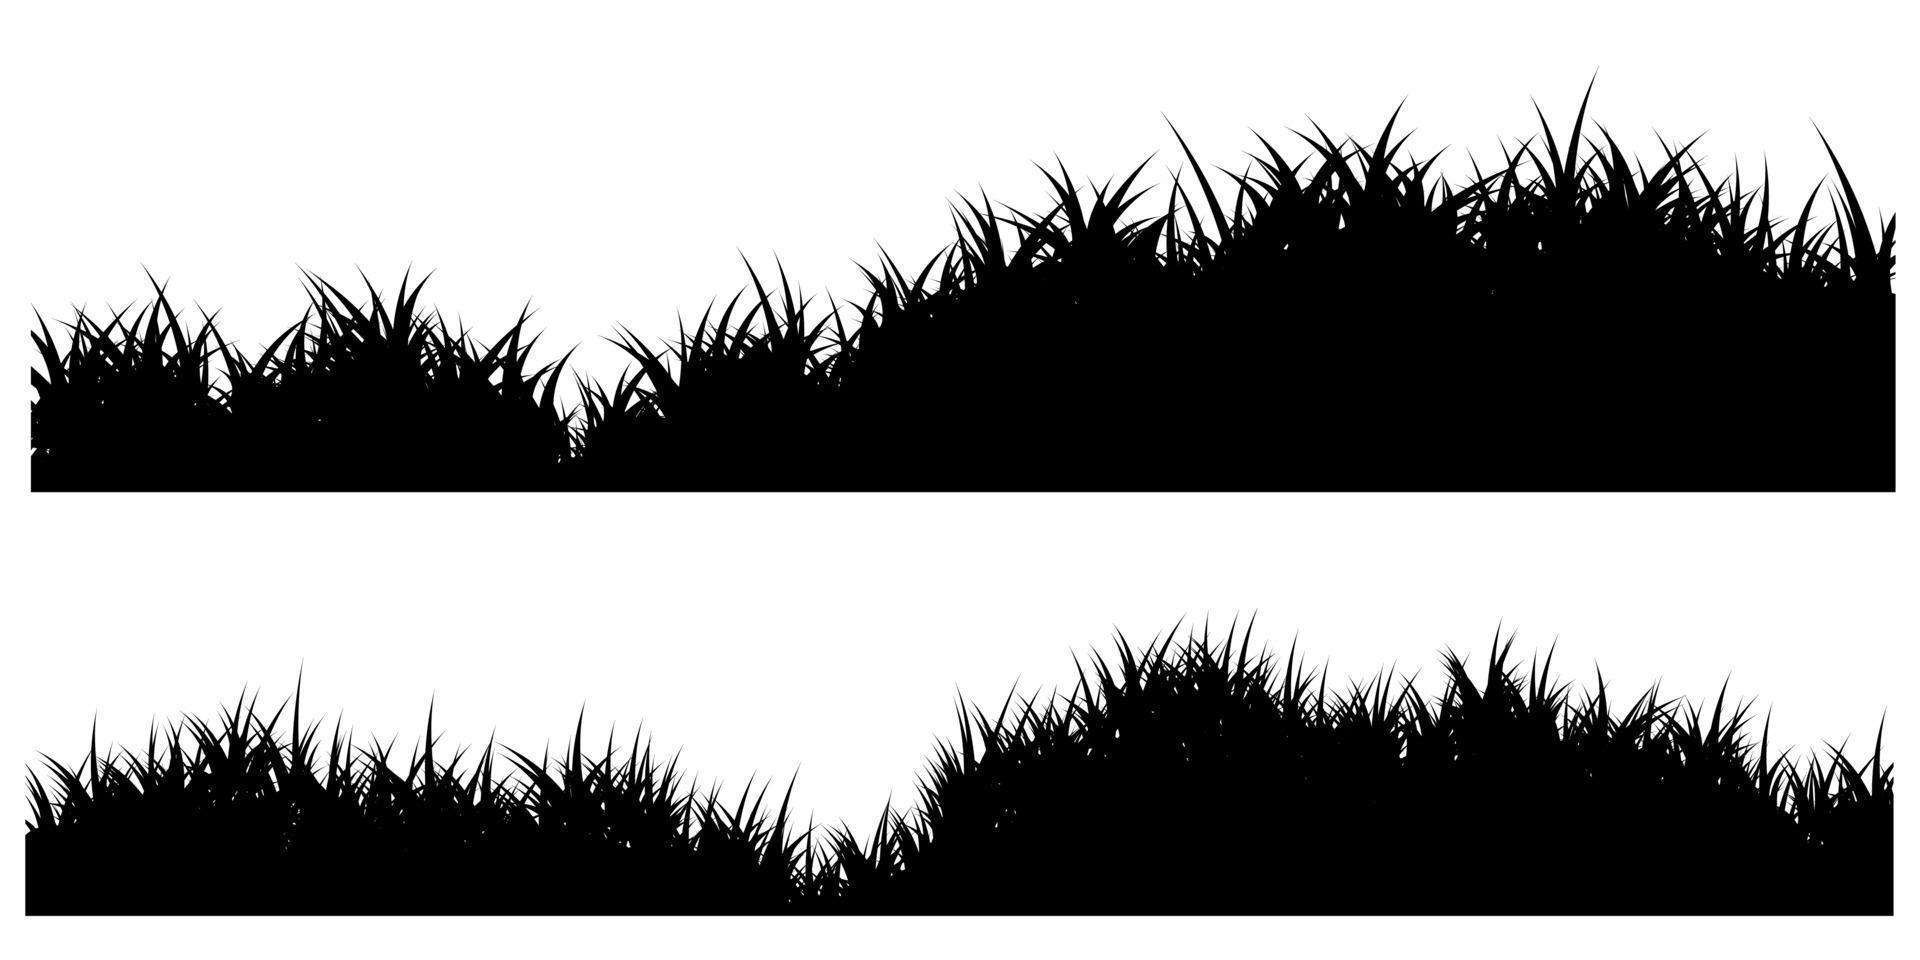 black grass silhouette for background or banner, grass border vector isolated